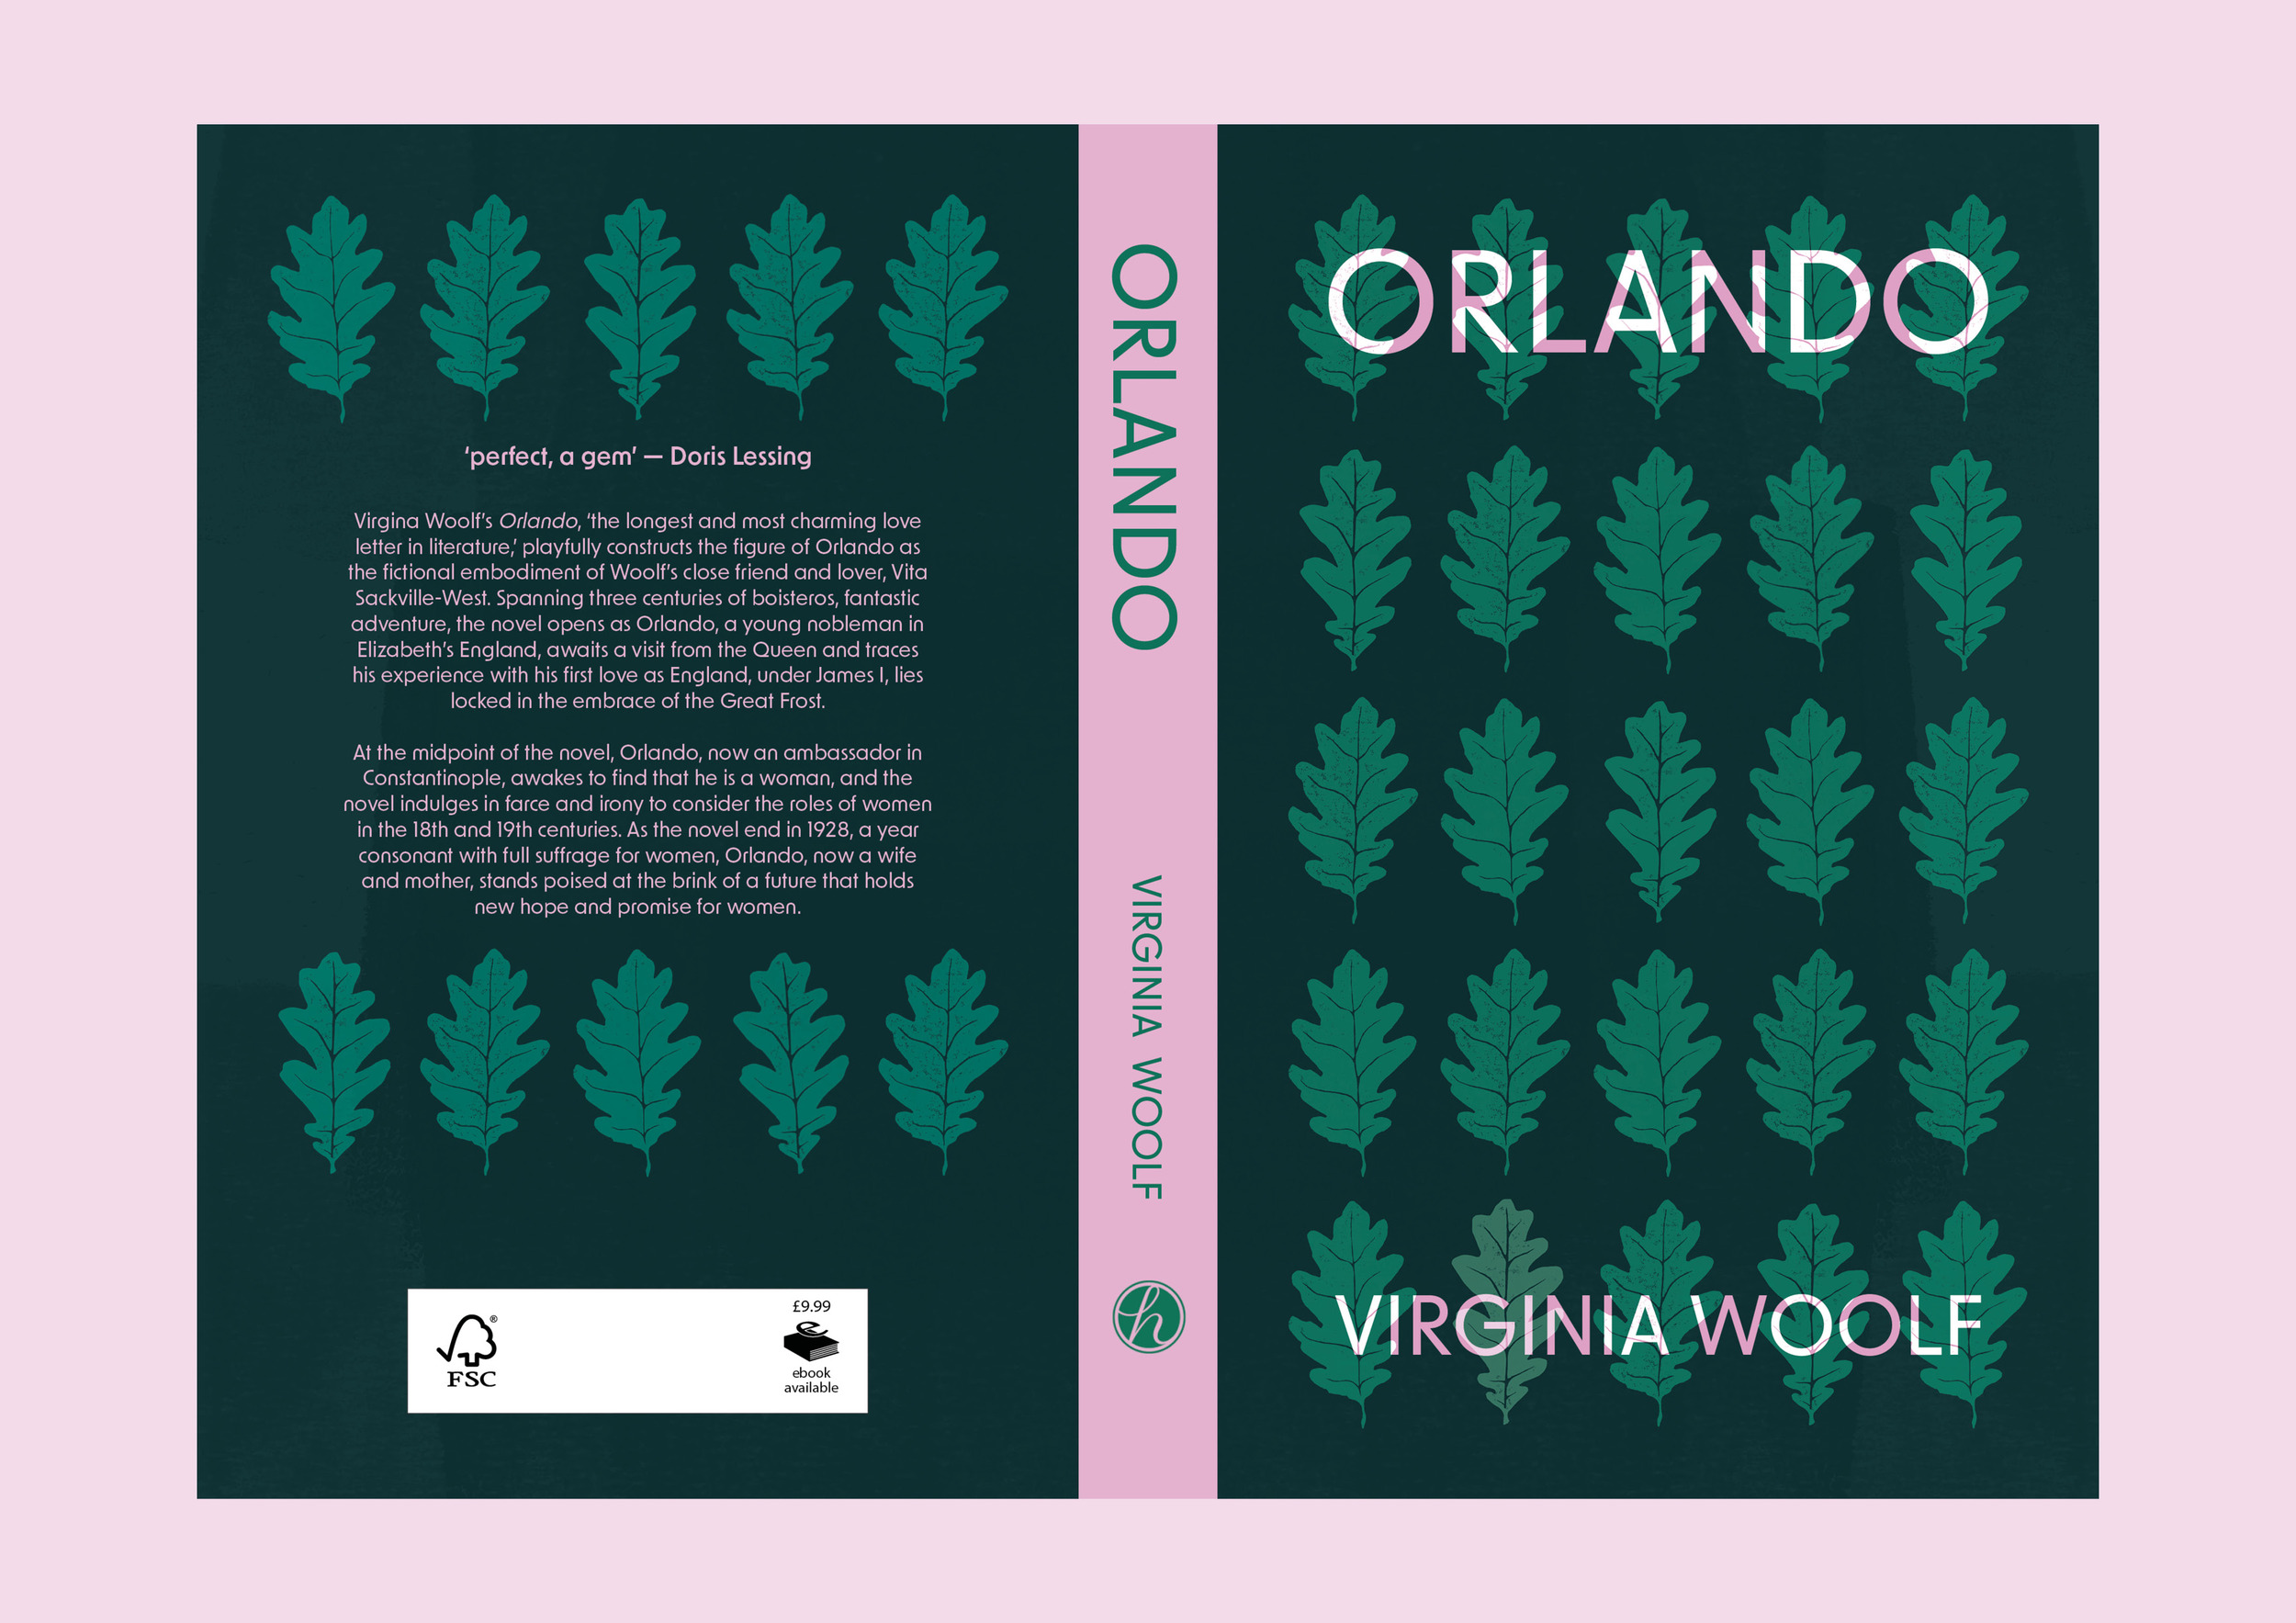 Book cover design by Harriett Smith using hand cut and printed leaves.